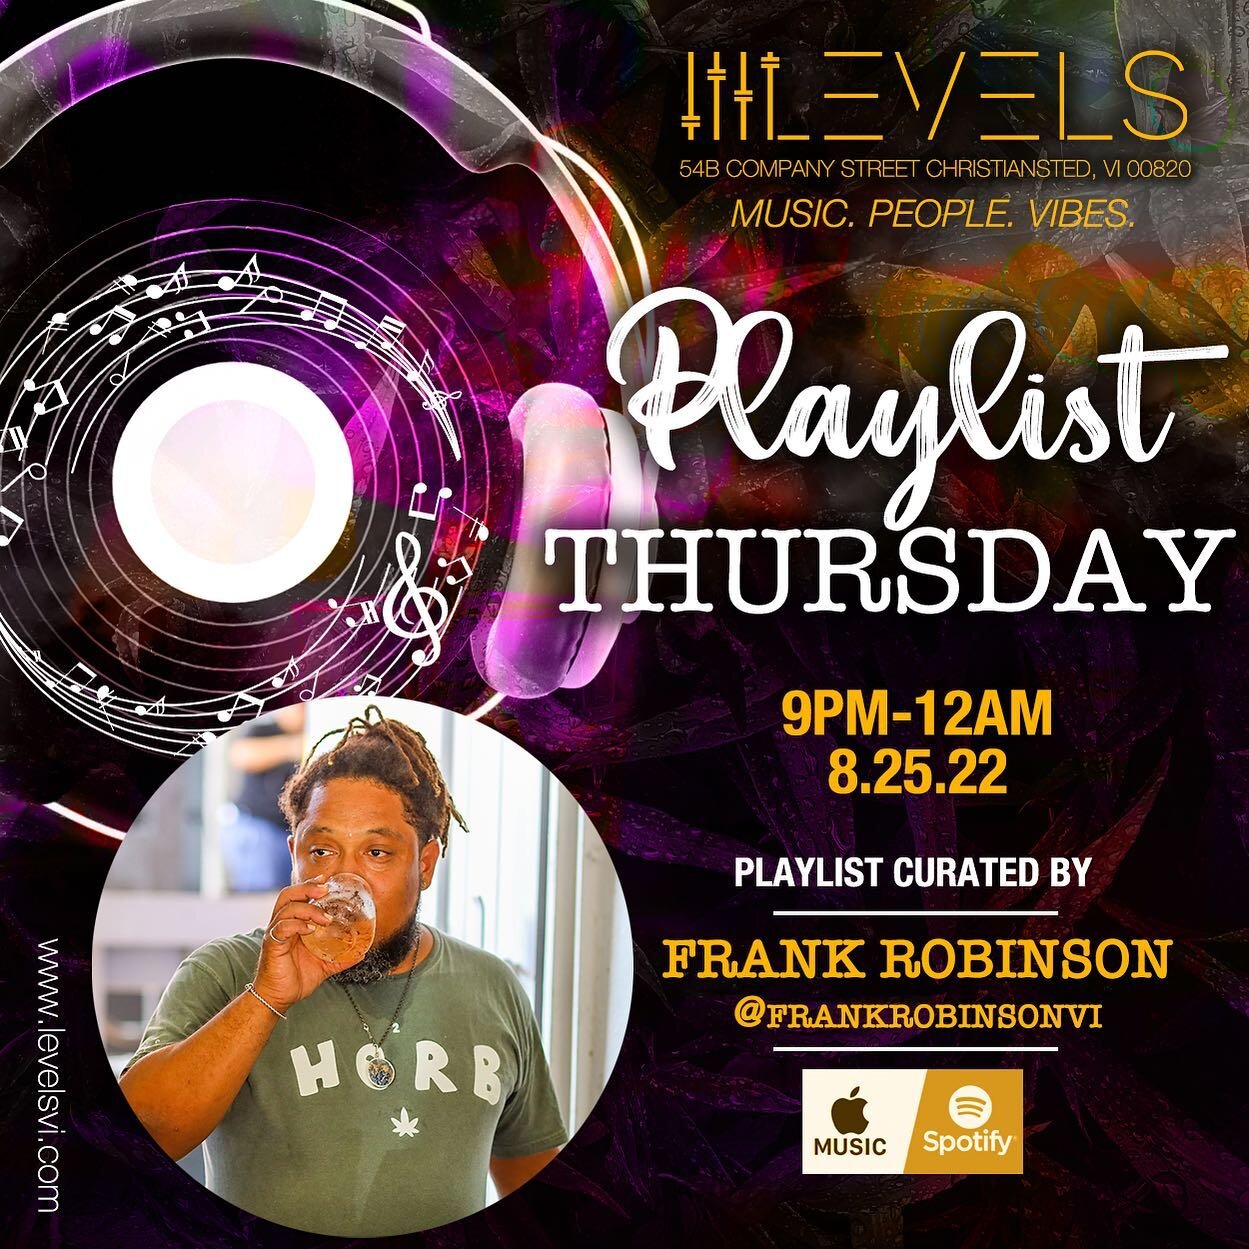 Come enjoy the musical sounds curated by @frankrobinsonvi at Playlist Thursday! #LevelsVI